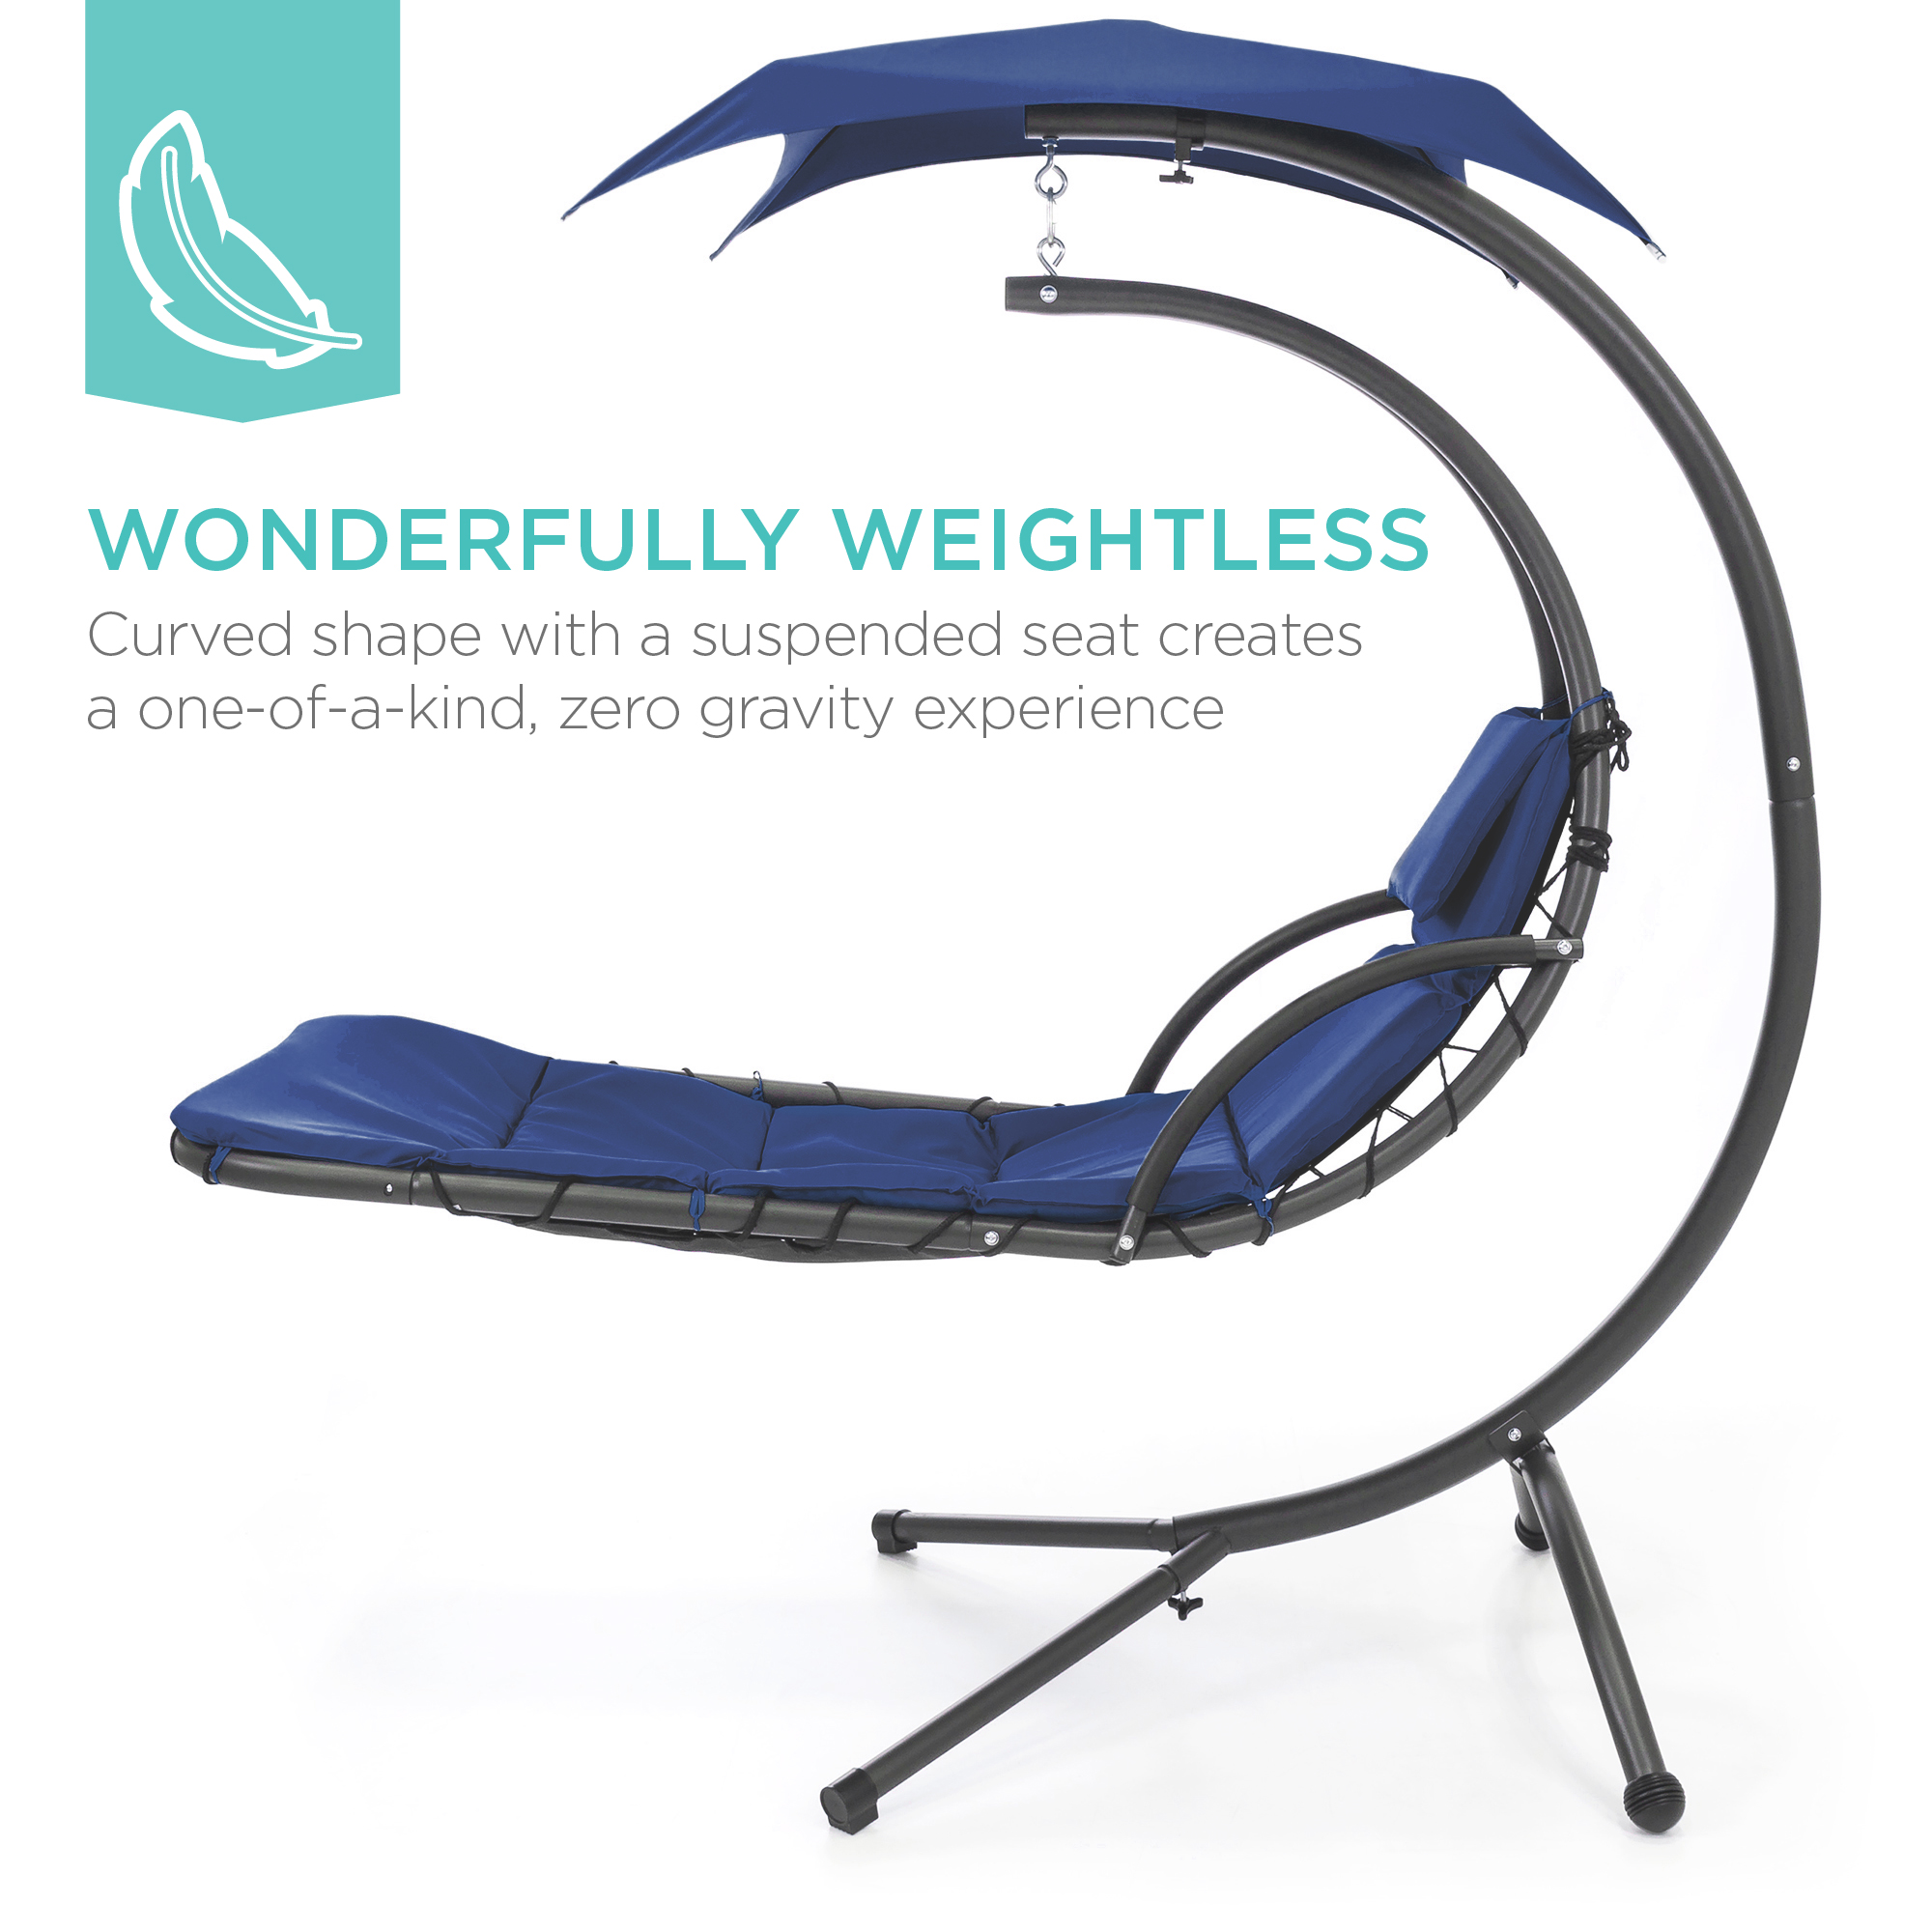 Best Choice Products Hanging Curved Chaise Lounge Chair Swing for Backyard, Patio w/ Pillow, Shade, Stand - Navy Blue - image 3 of 8